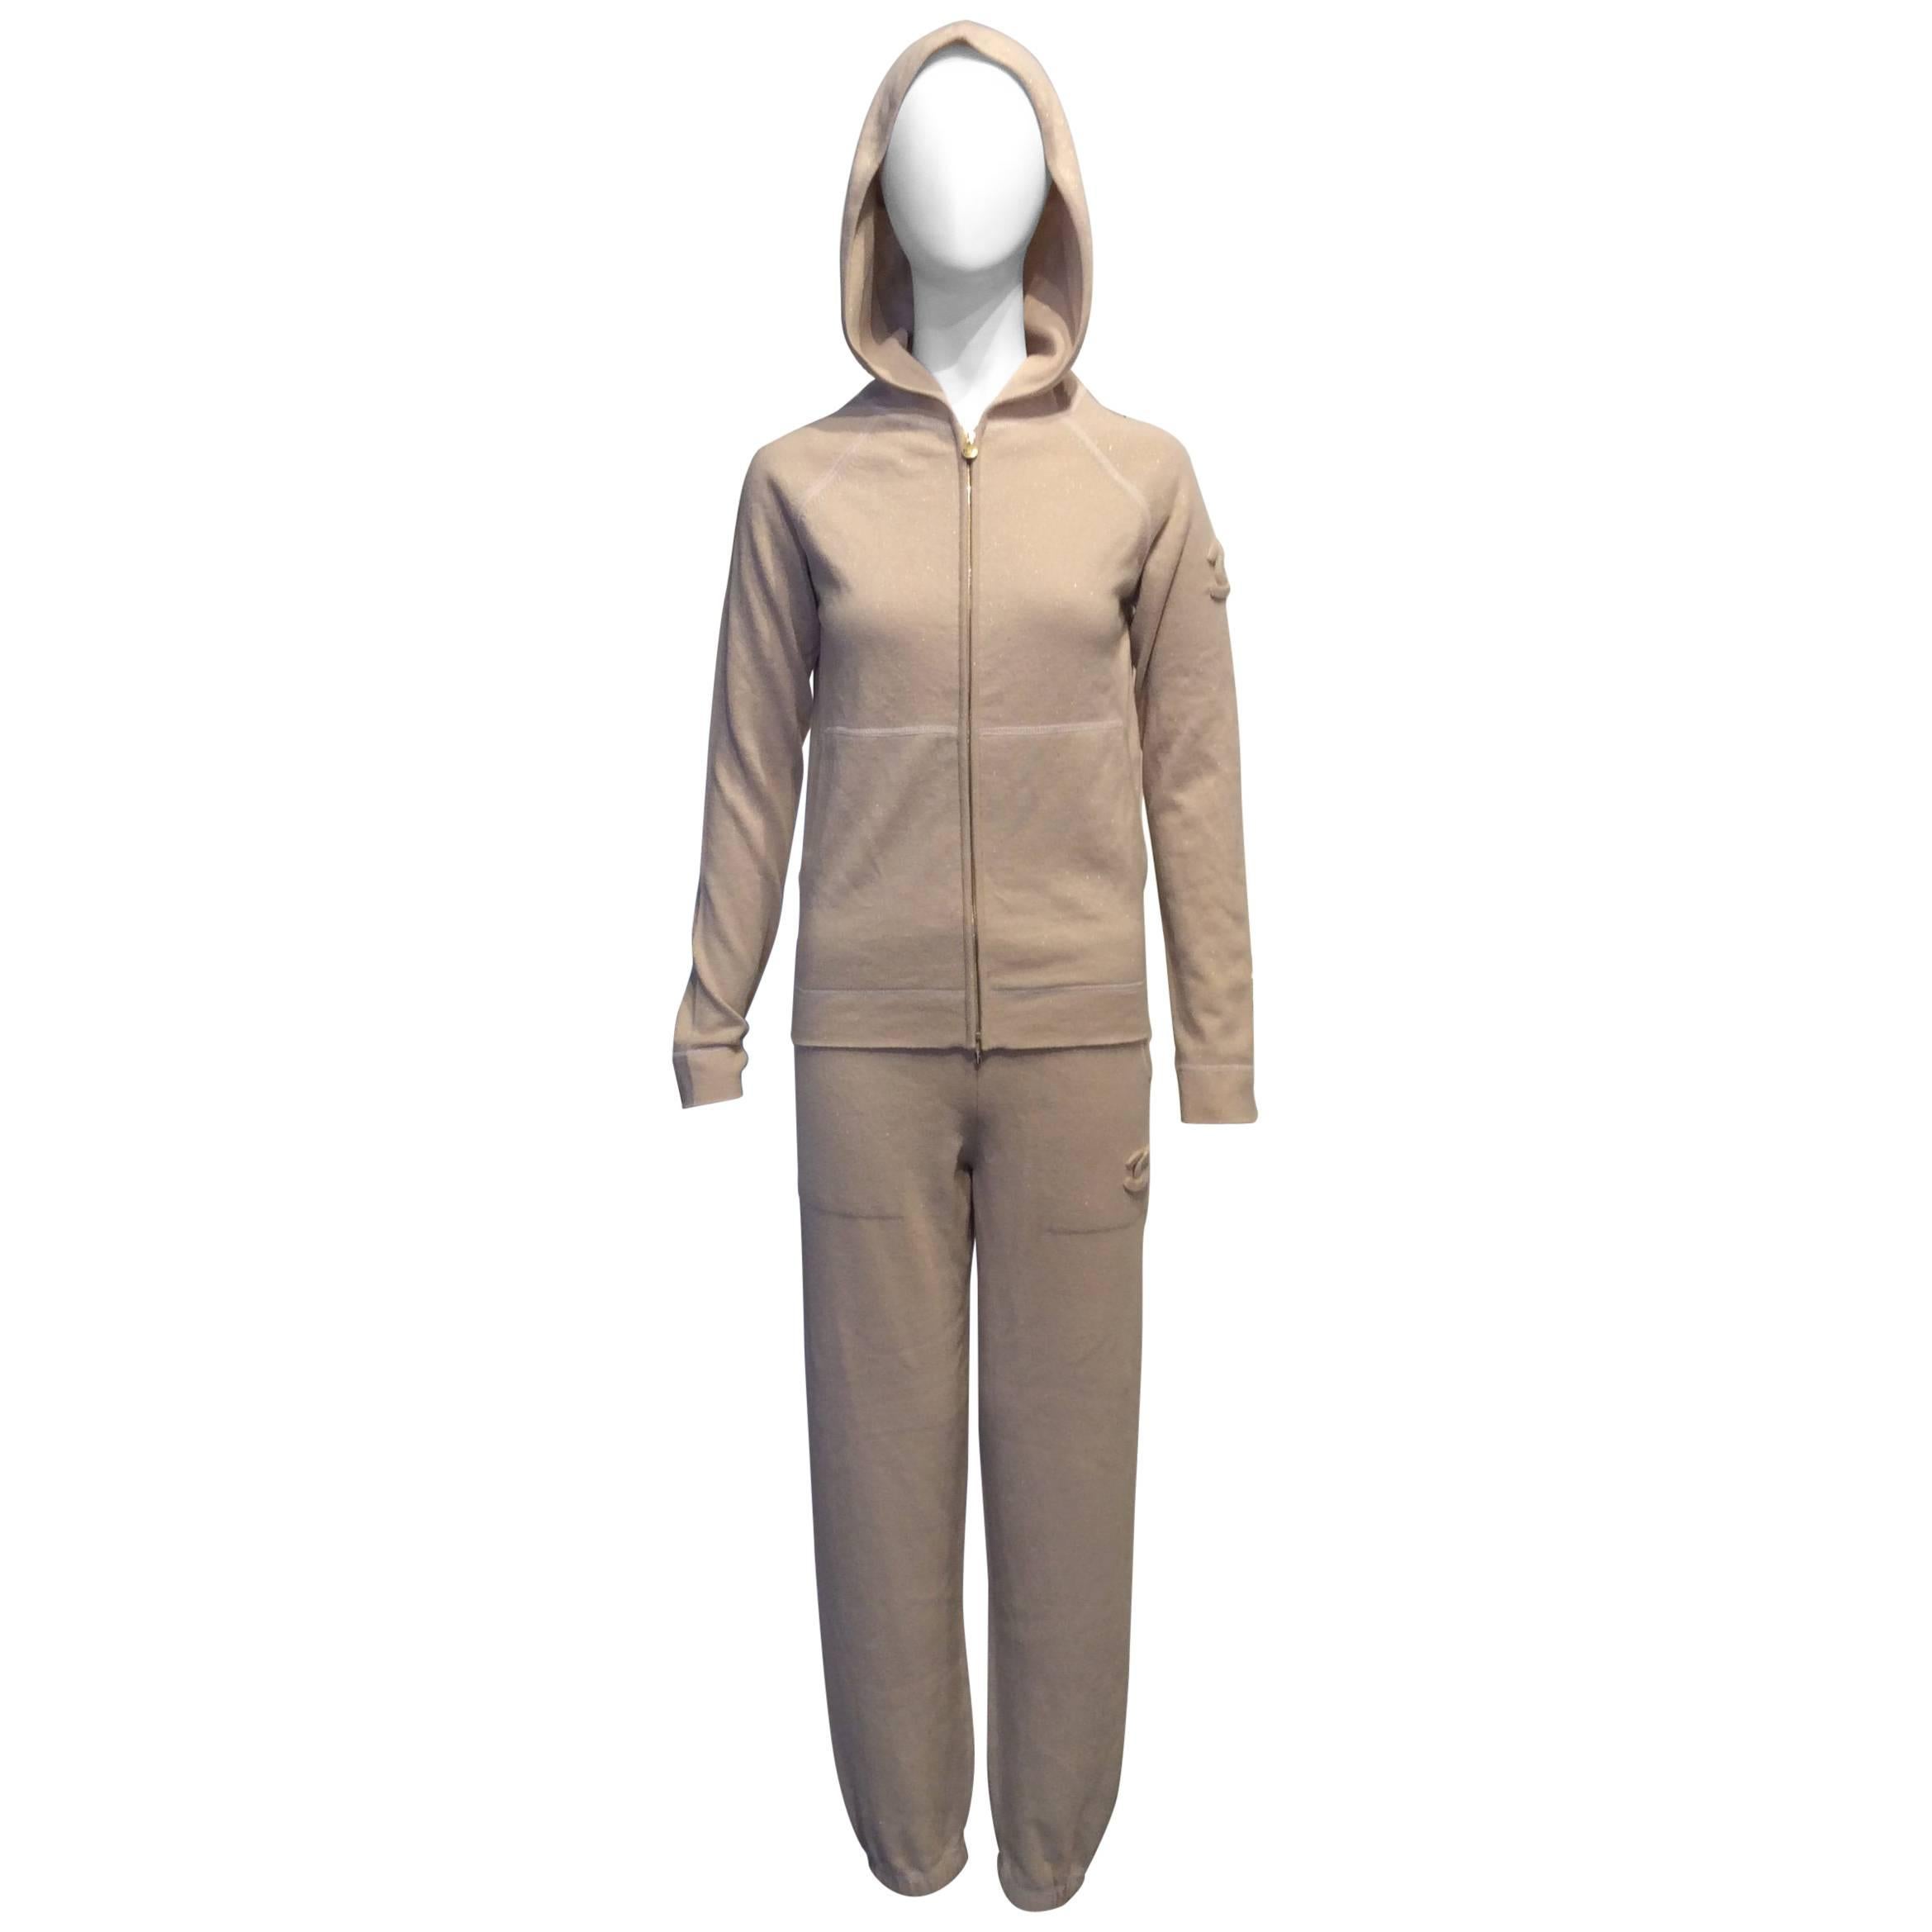 Chanel Gold and Beige Long Sleeve Hooded Cashmere Tracksuit Sz Fr34, US2